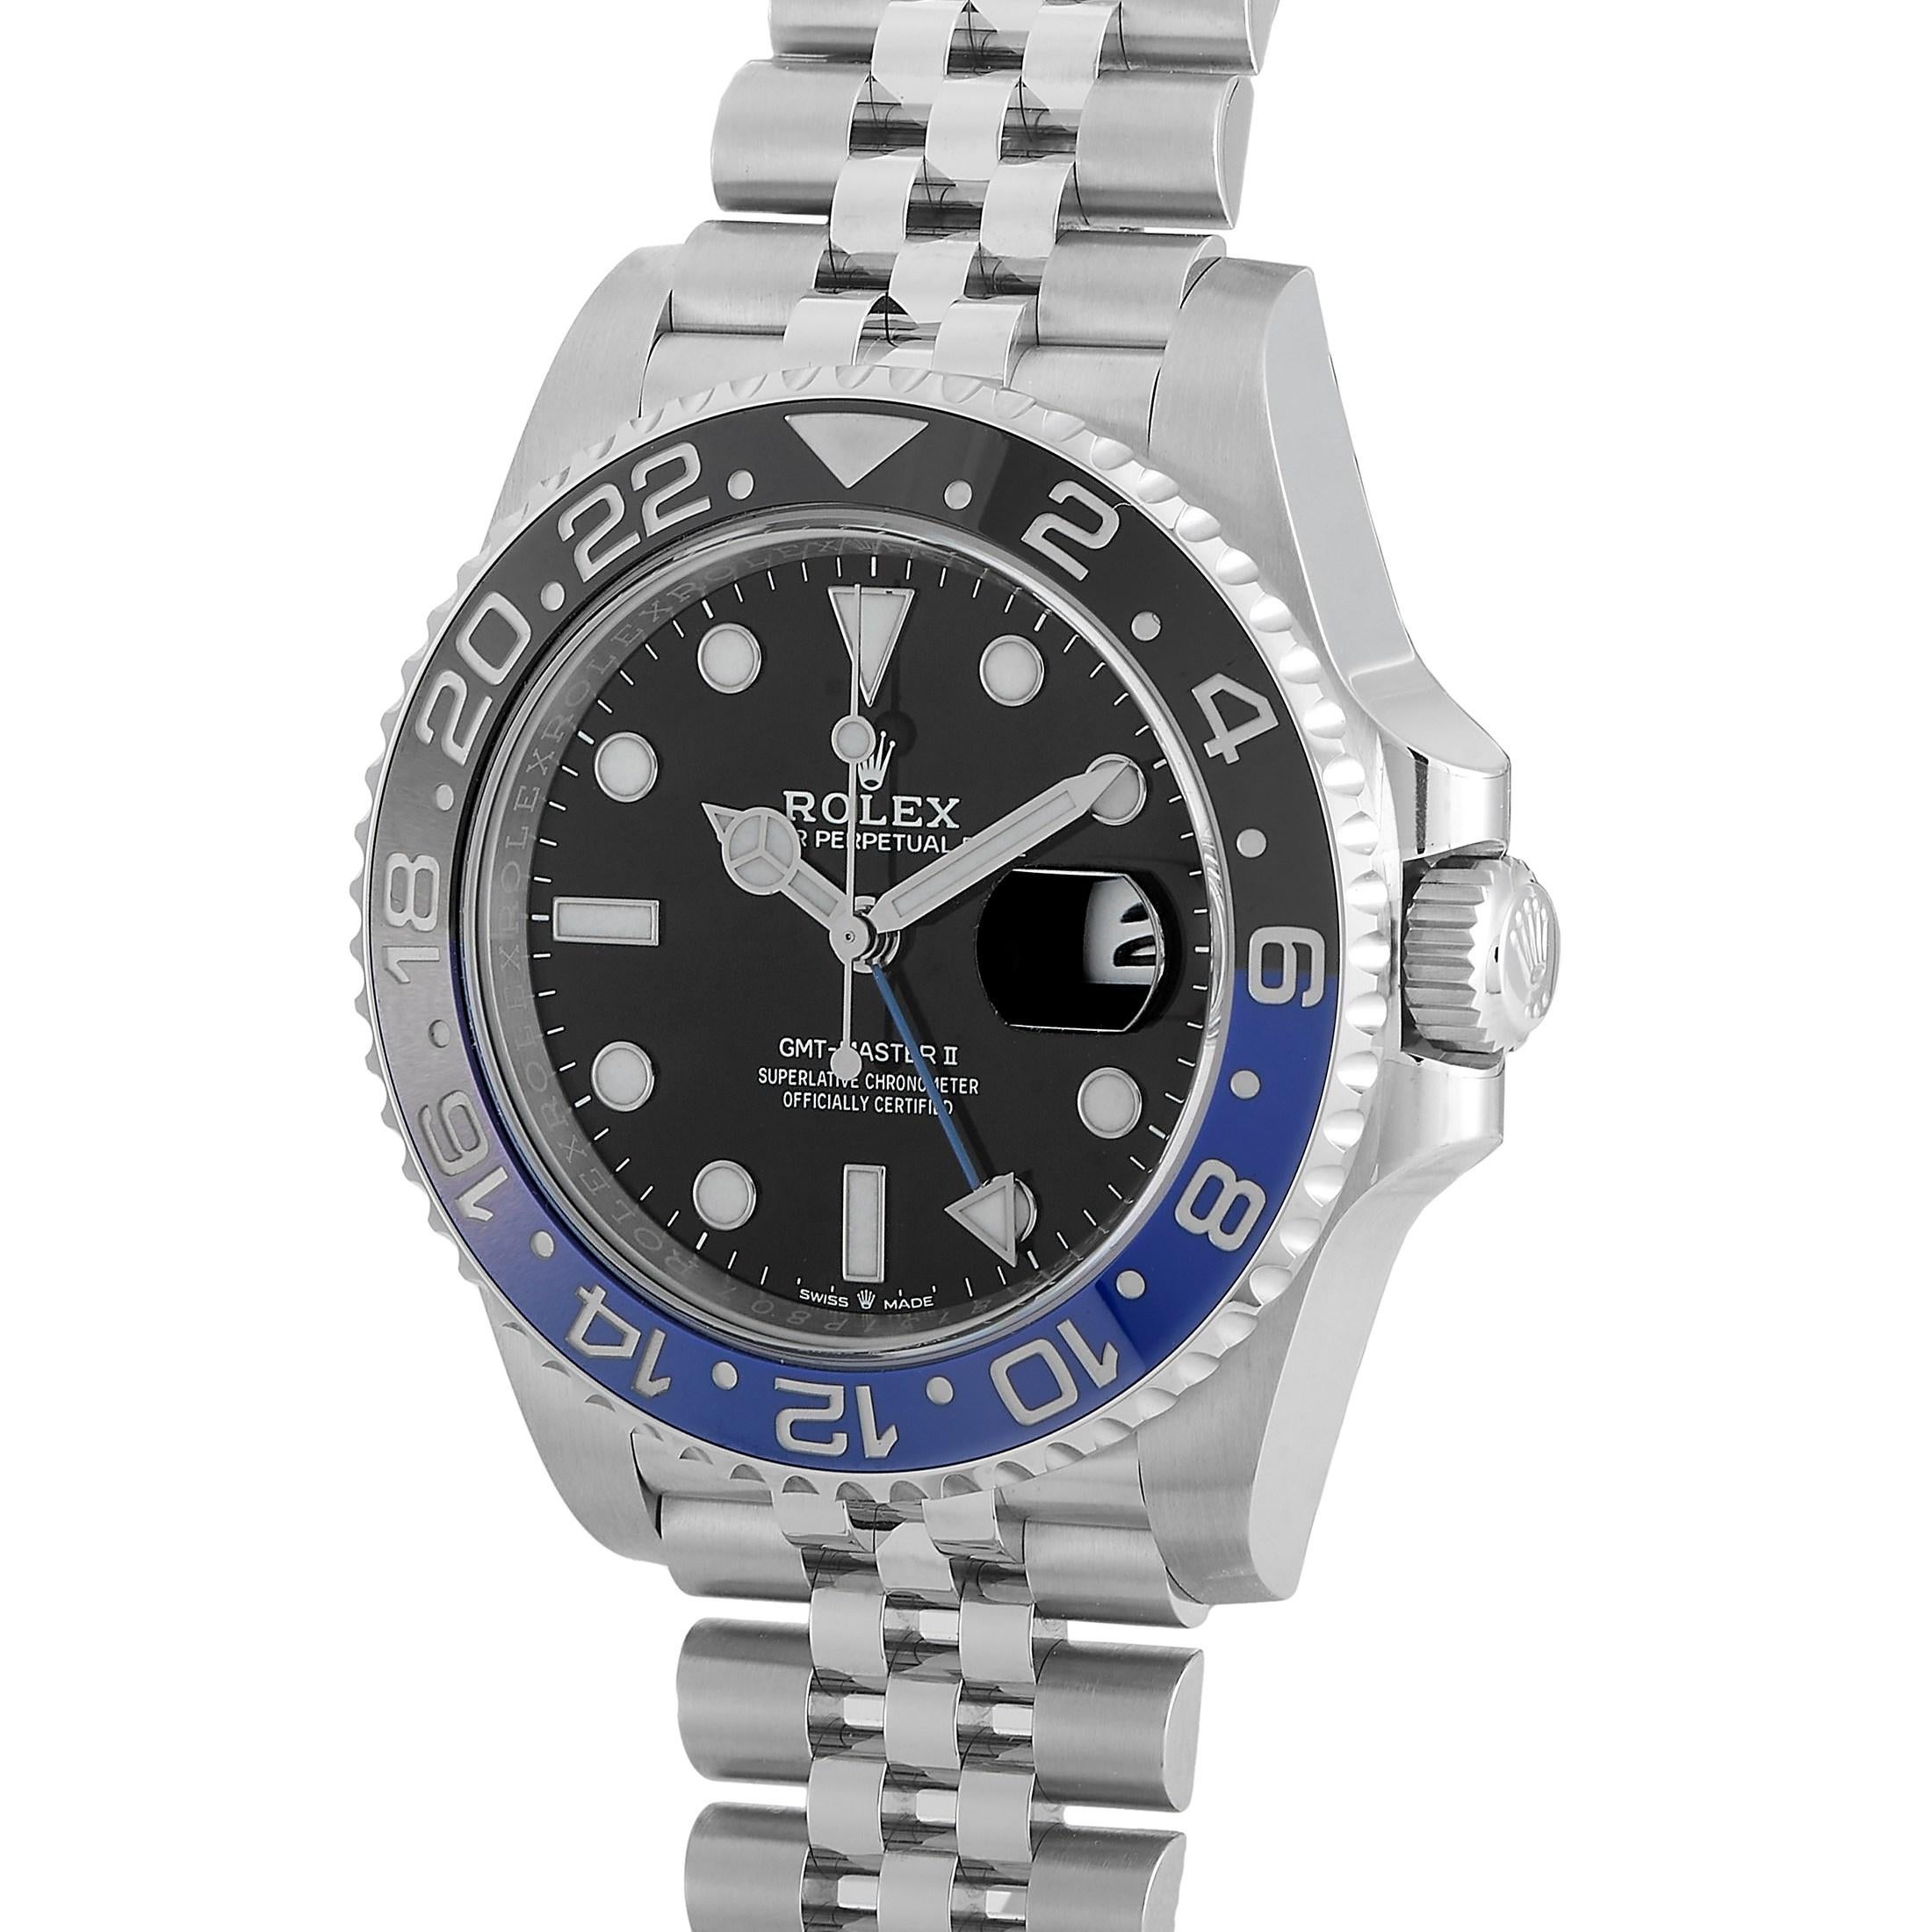 A traveler's watch with character. Introduced in 2019, the Rolex GMT-Master II Batman Stainless Steel Men's Watch 126710BLNR is designed with a 40mm-wide case in Rolex's Oystersteel, and a blue-and-black Cerachrom bezel that rotates in both